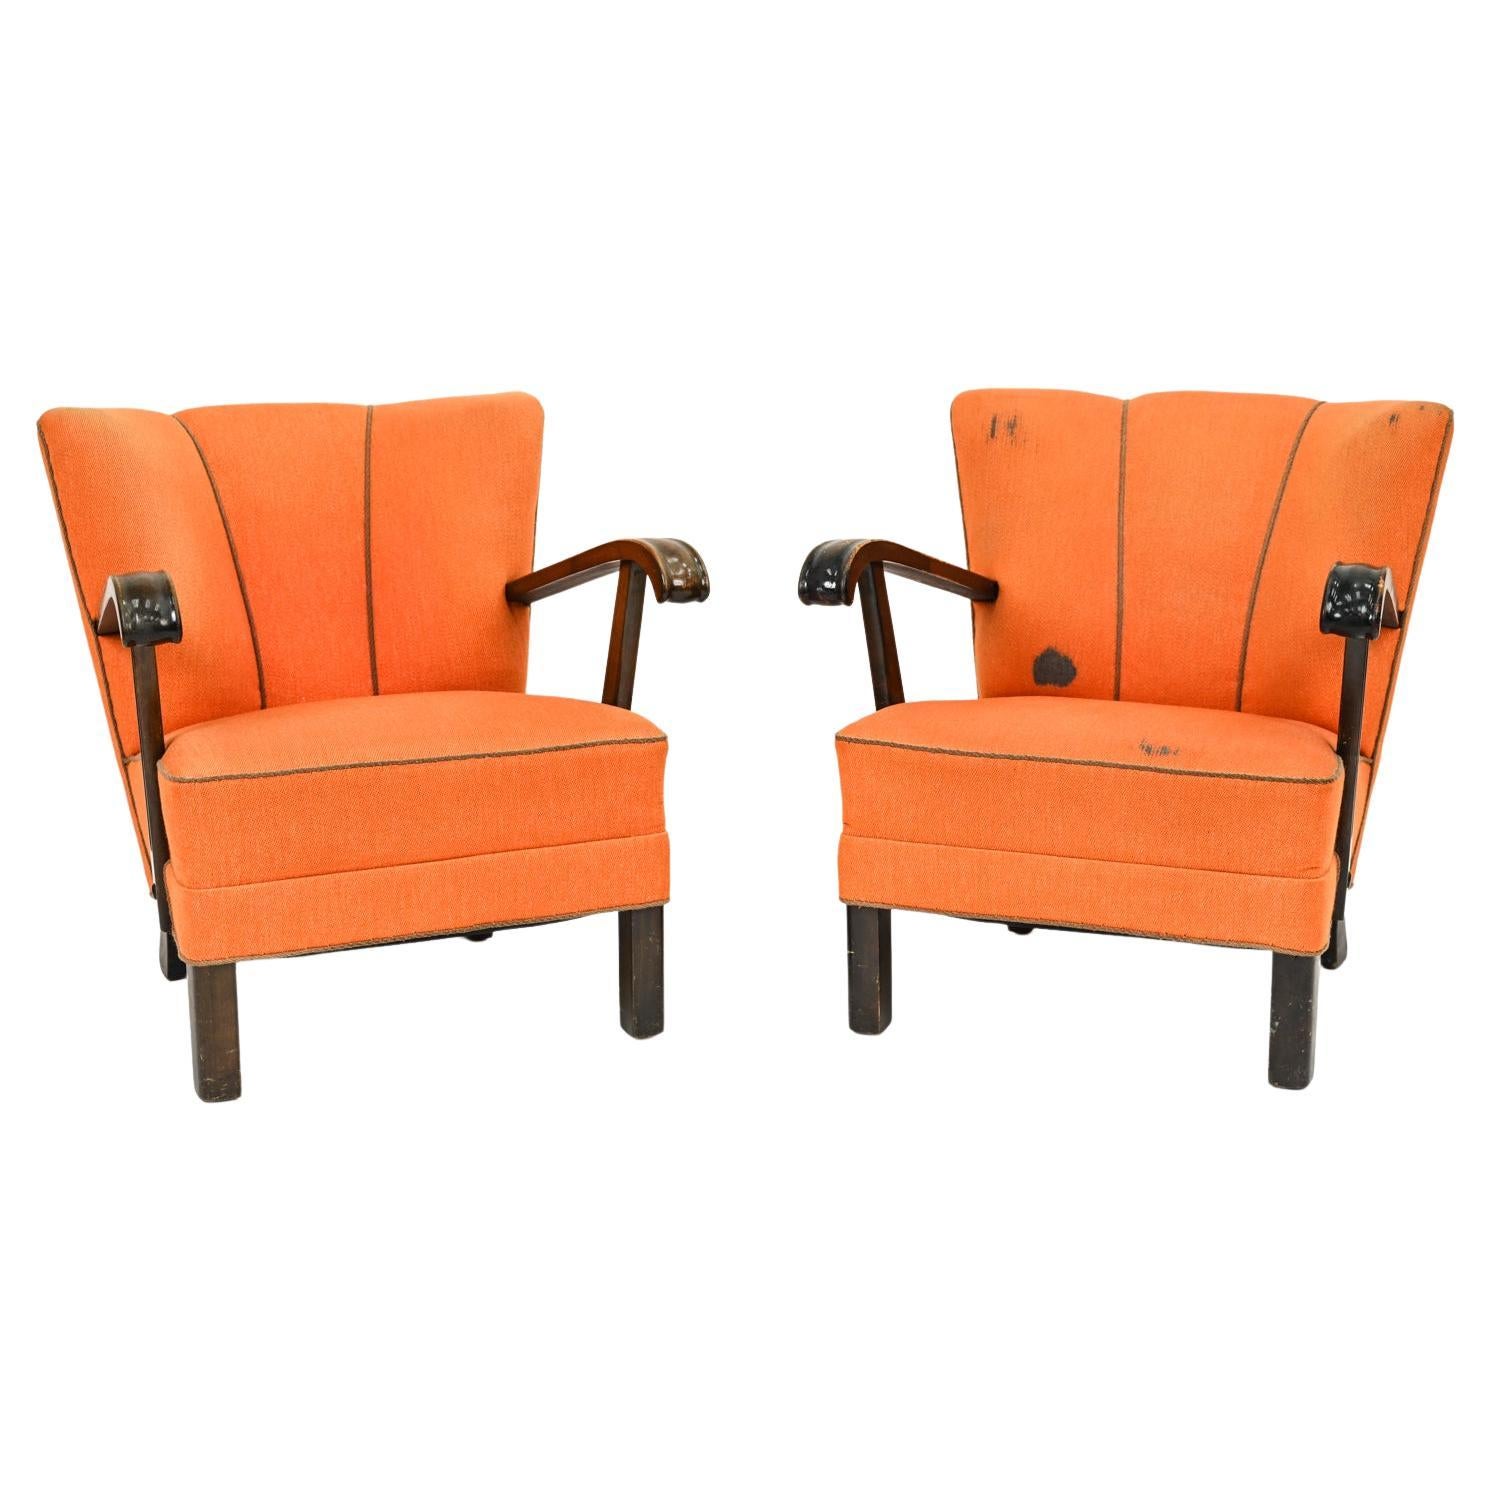 Pair of Slagelse Danish Channel-Back Lounge Chairs